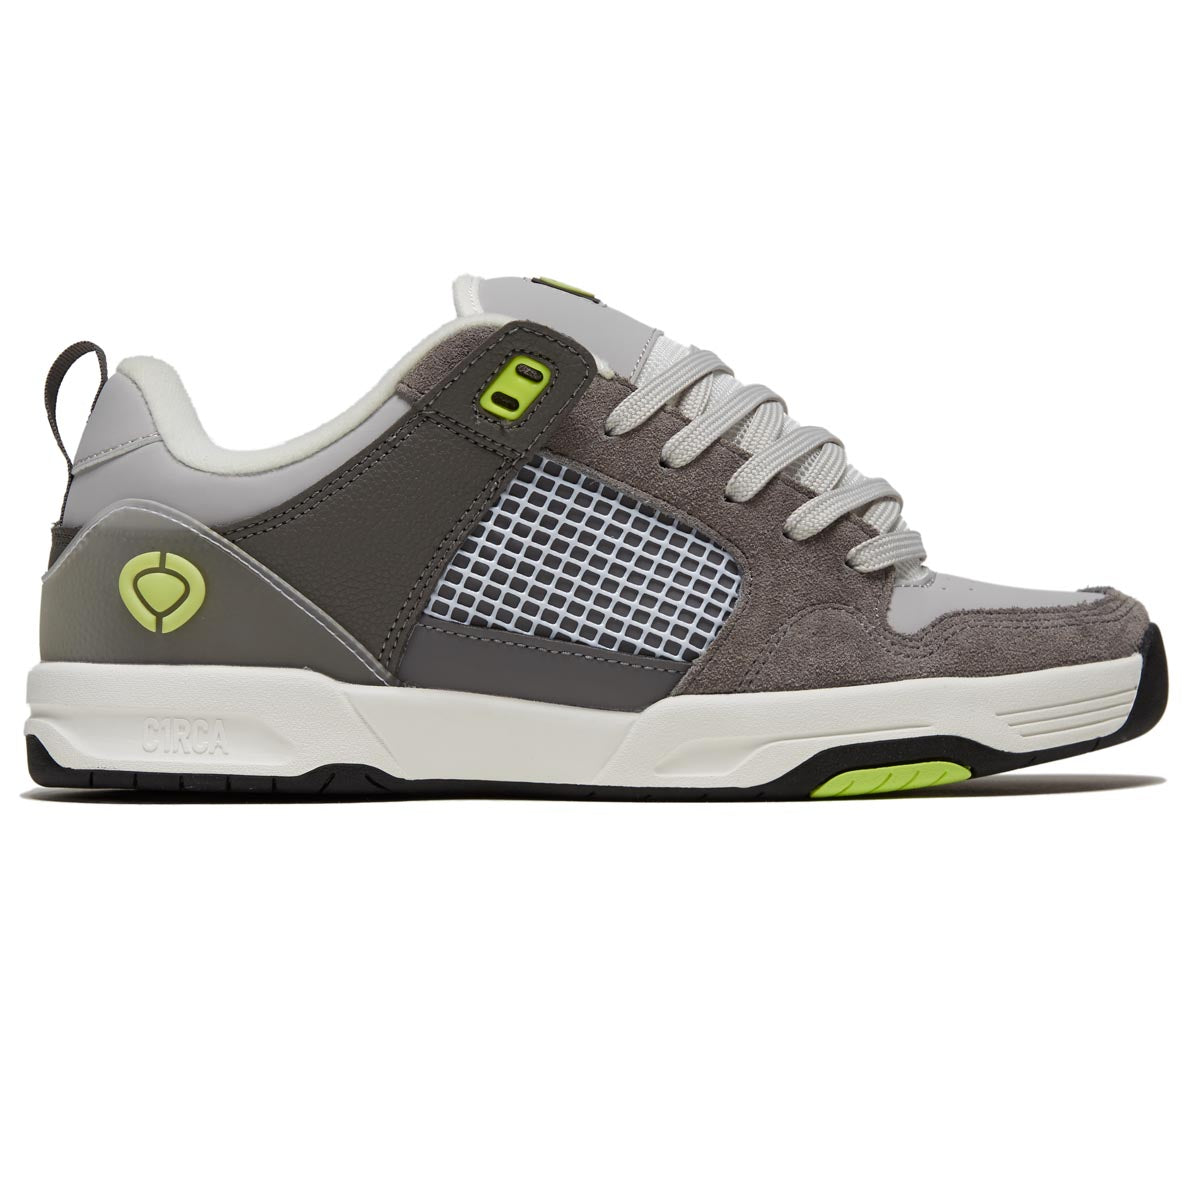 C1rca Tave TT Shoes - Grey/Black/Lime Green image 1